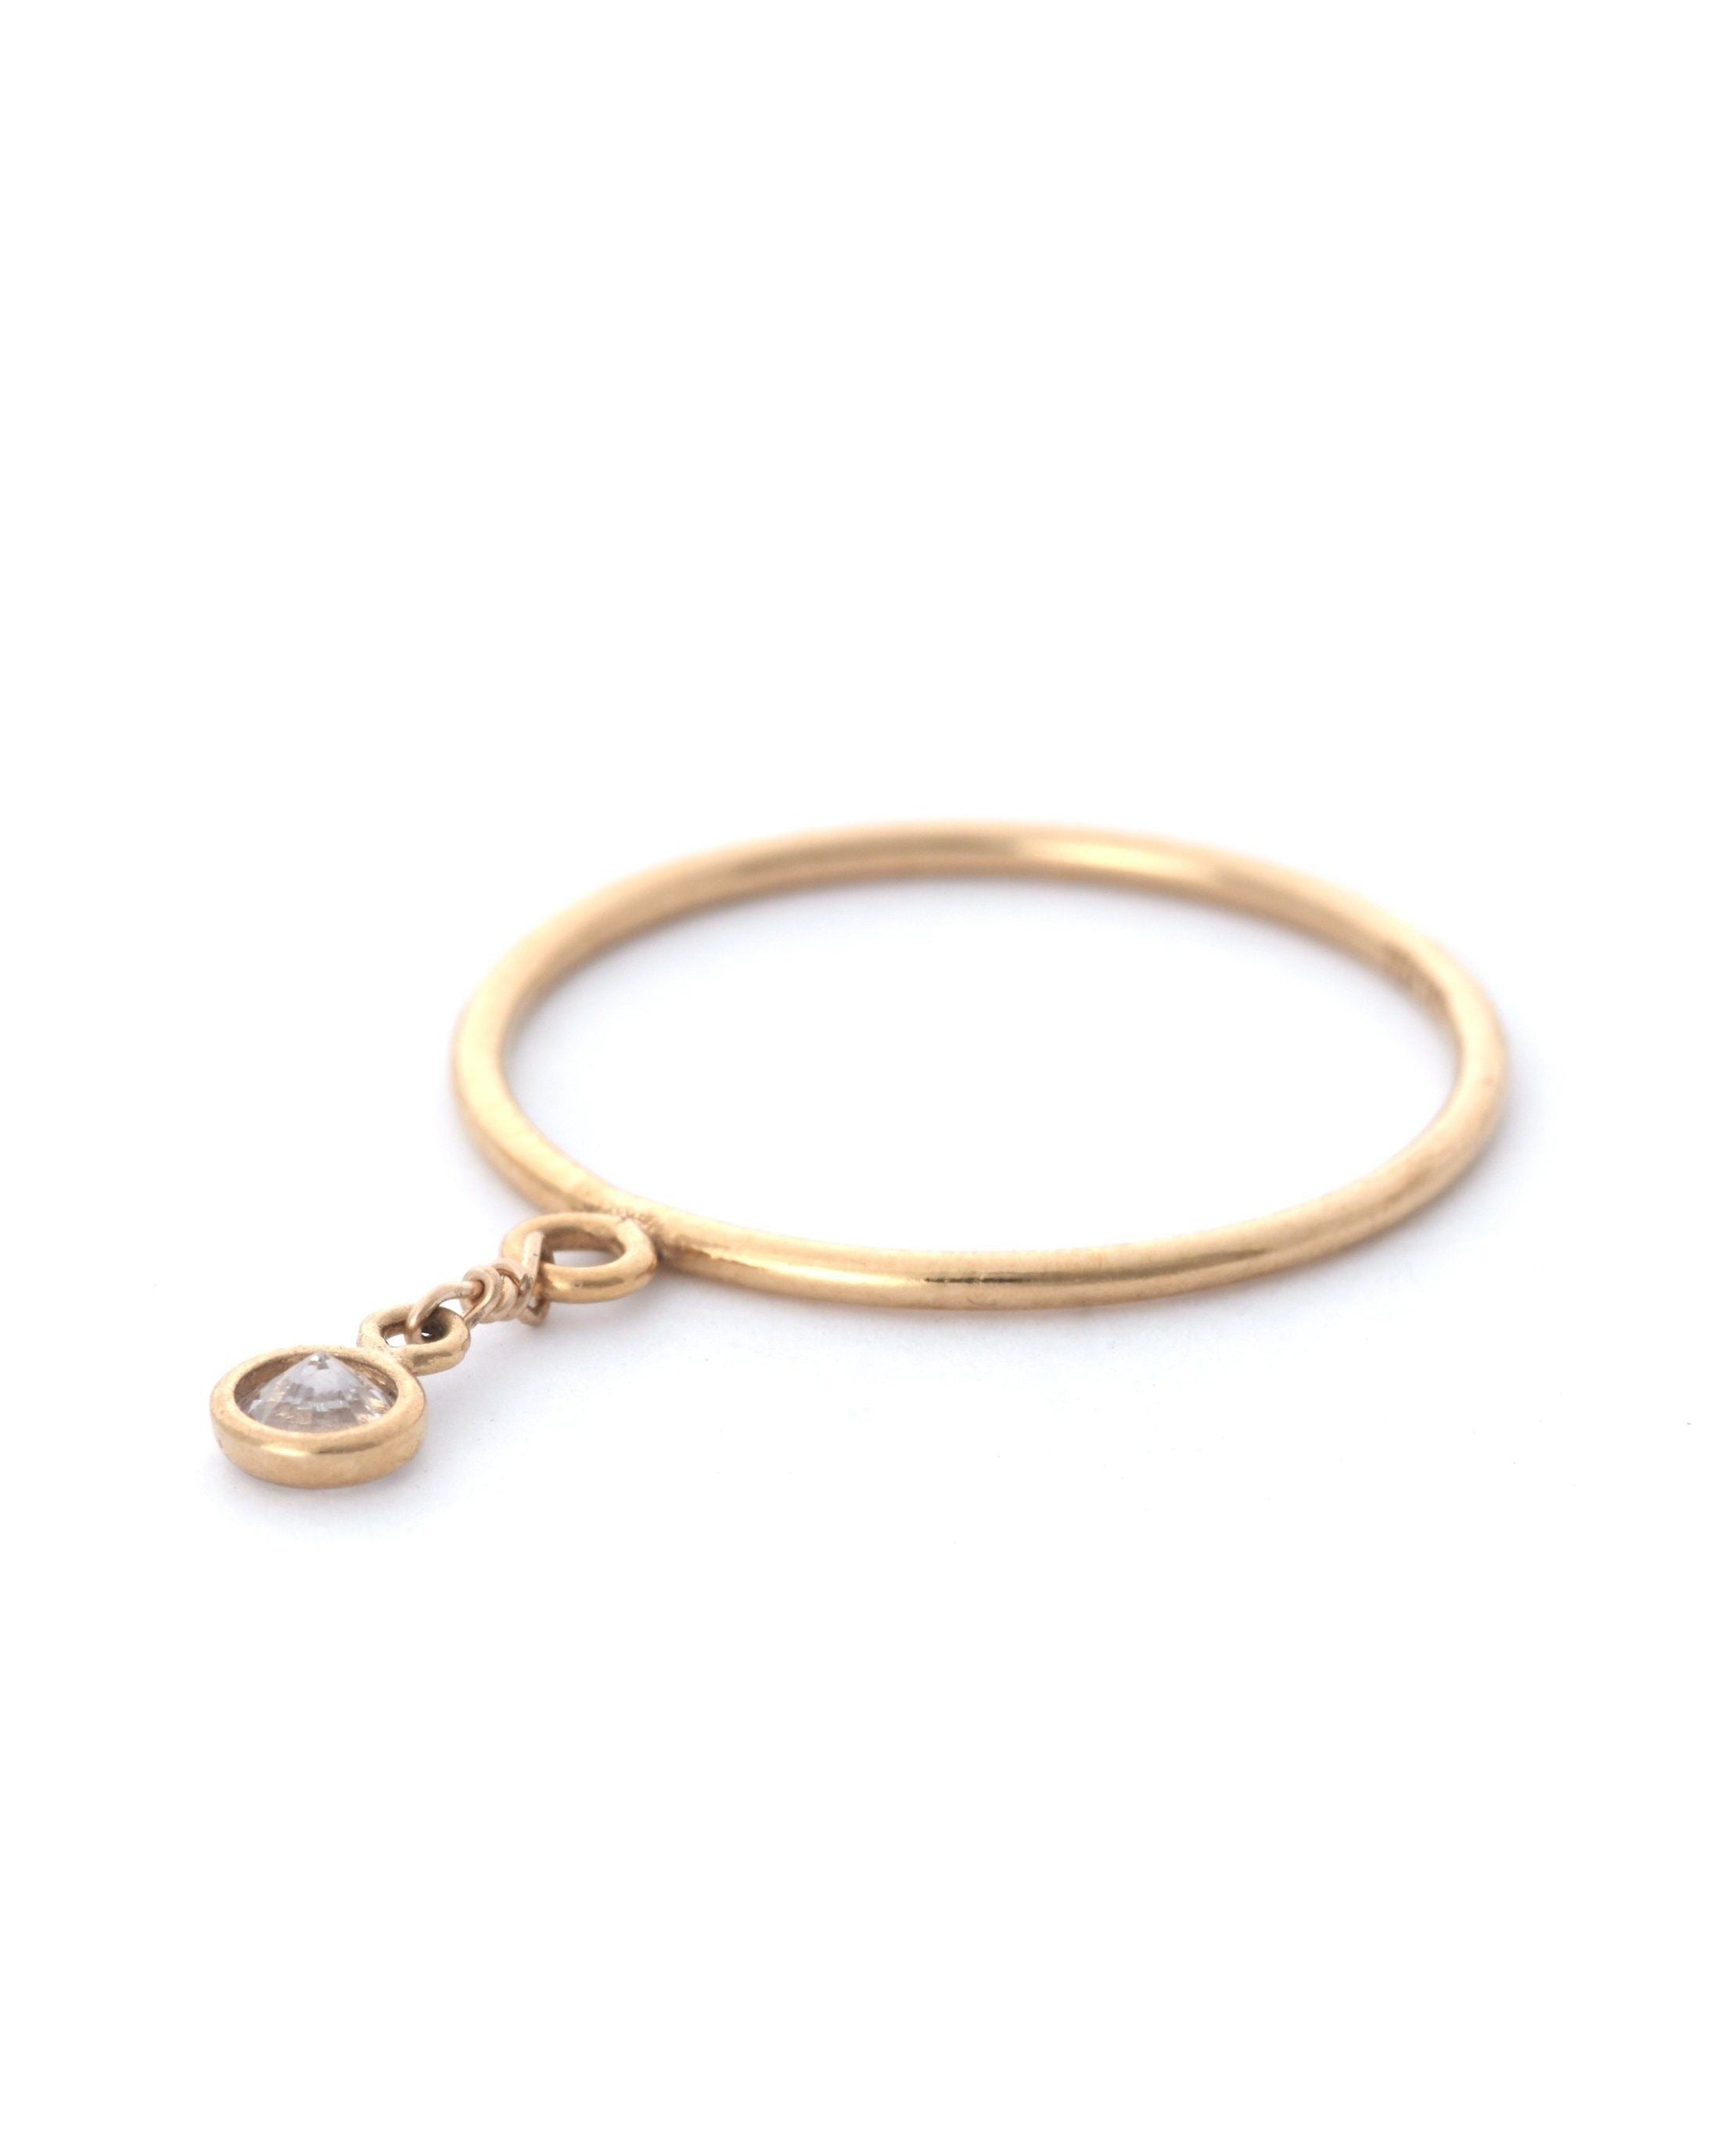 Petal Ring by KOZAKH. A 1mm band crafted in 14K Gold Filled, featuring a Swarovski Crystal charm.